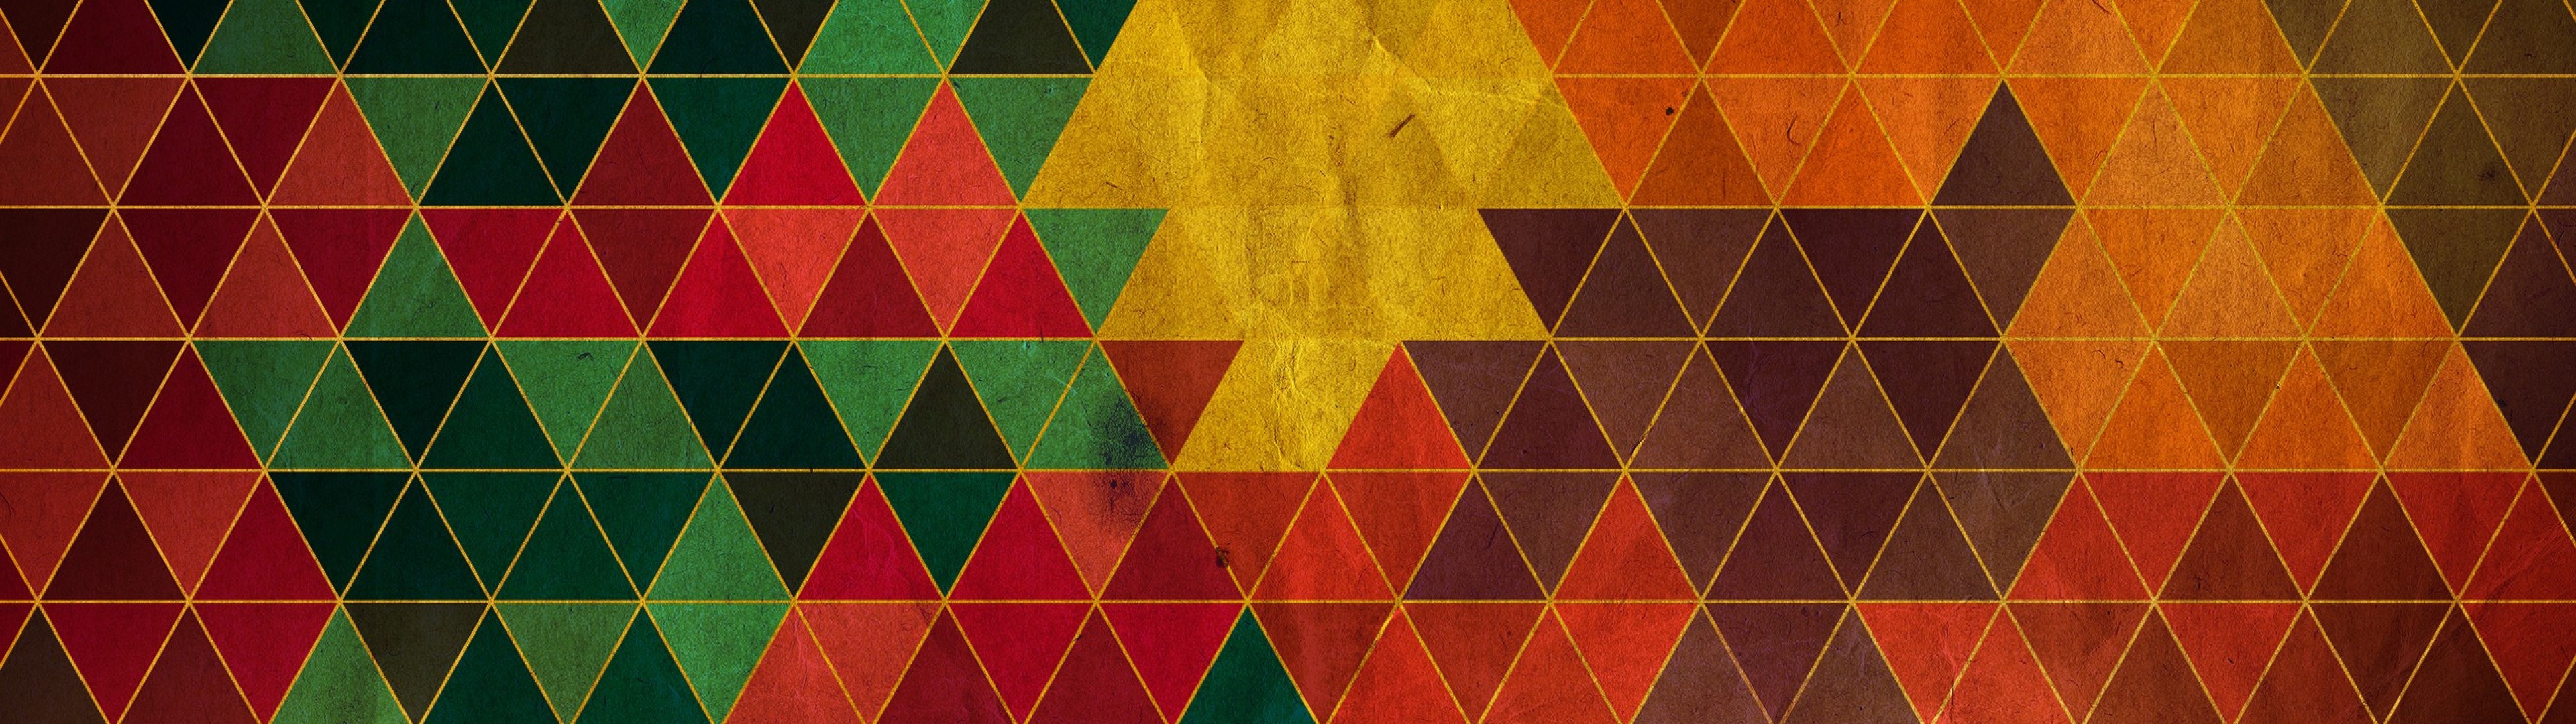 multiple Display, Colorful, Triangle, Abstract Wallpaper